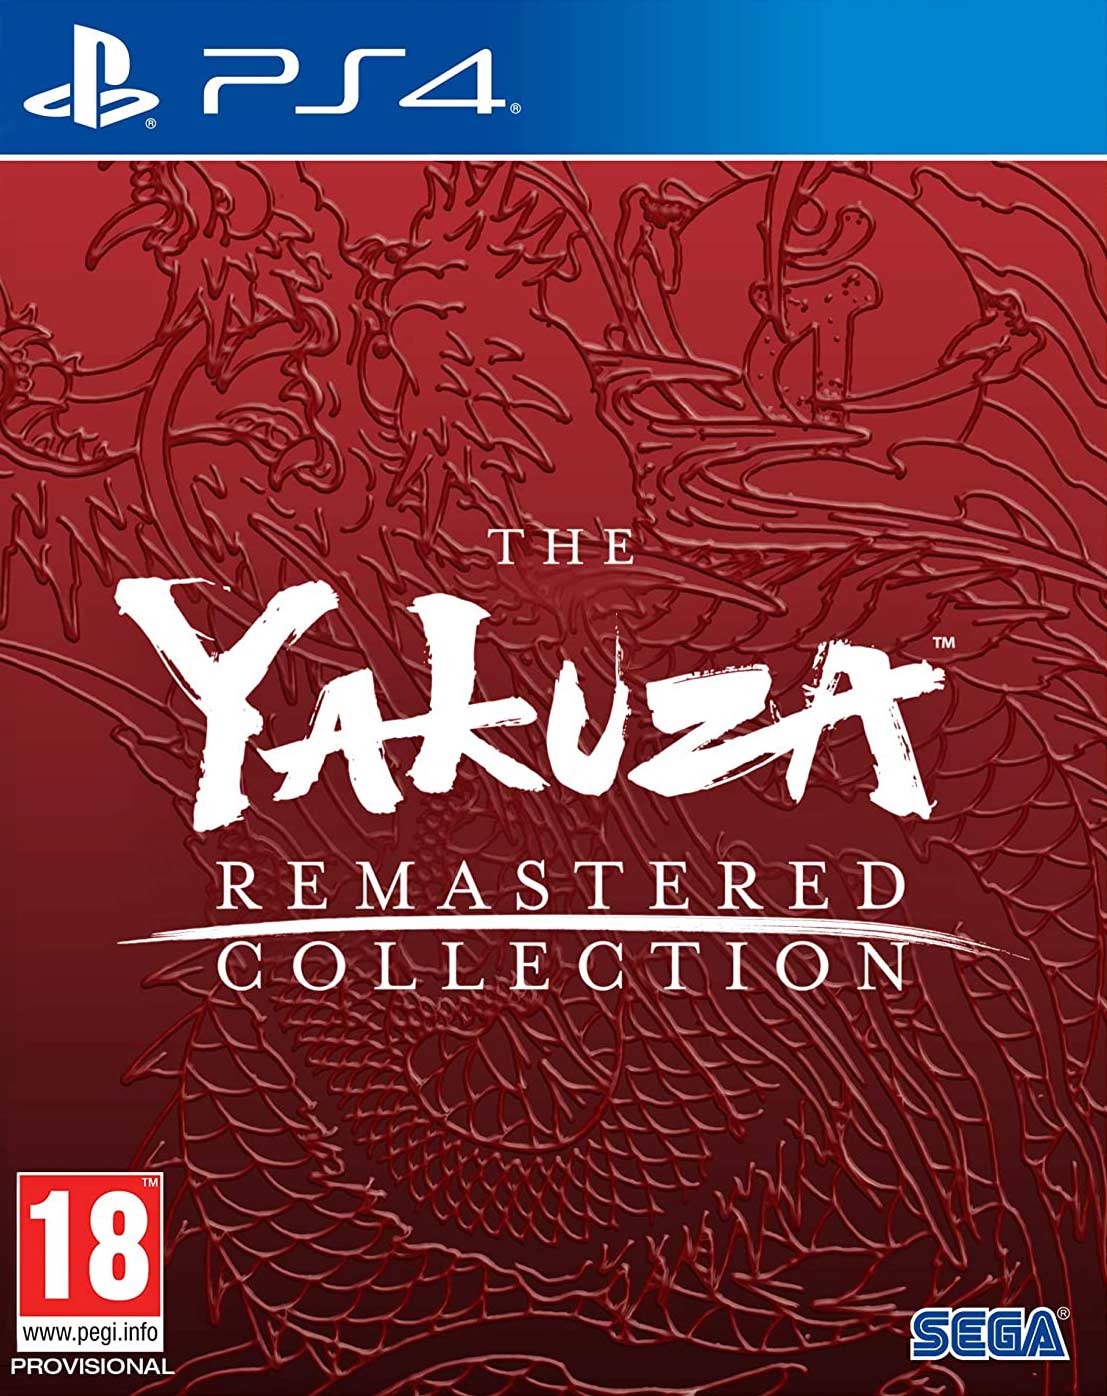 Yakuza Remastered Collection, The (PS4)(New) | Buy from Pwned Games with  confidence. | PS4 Games [new]